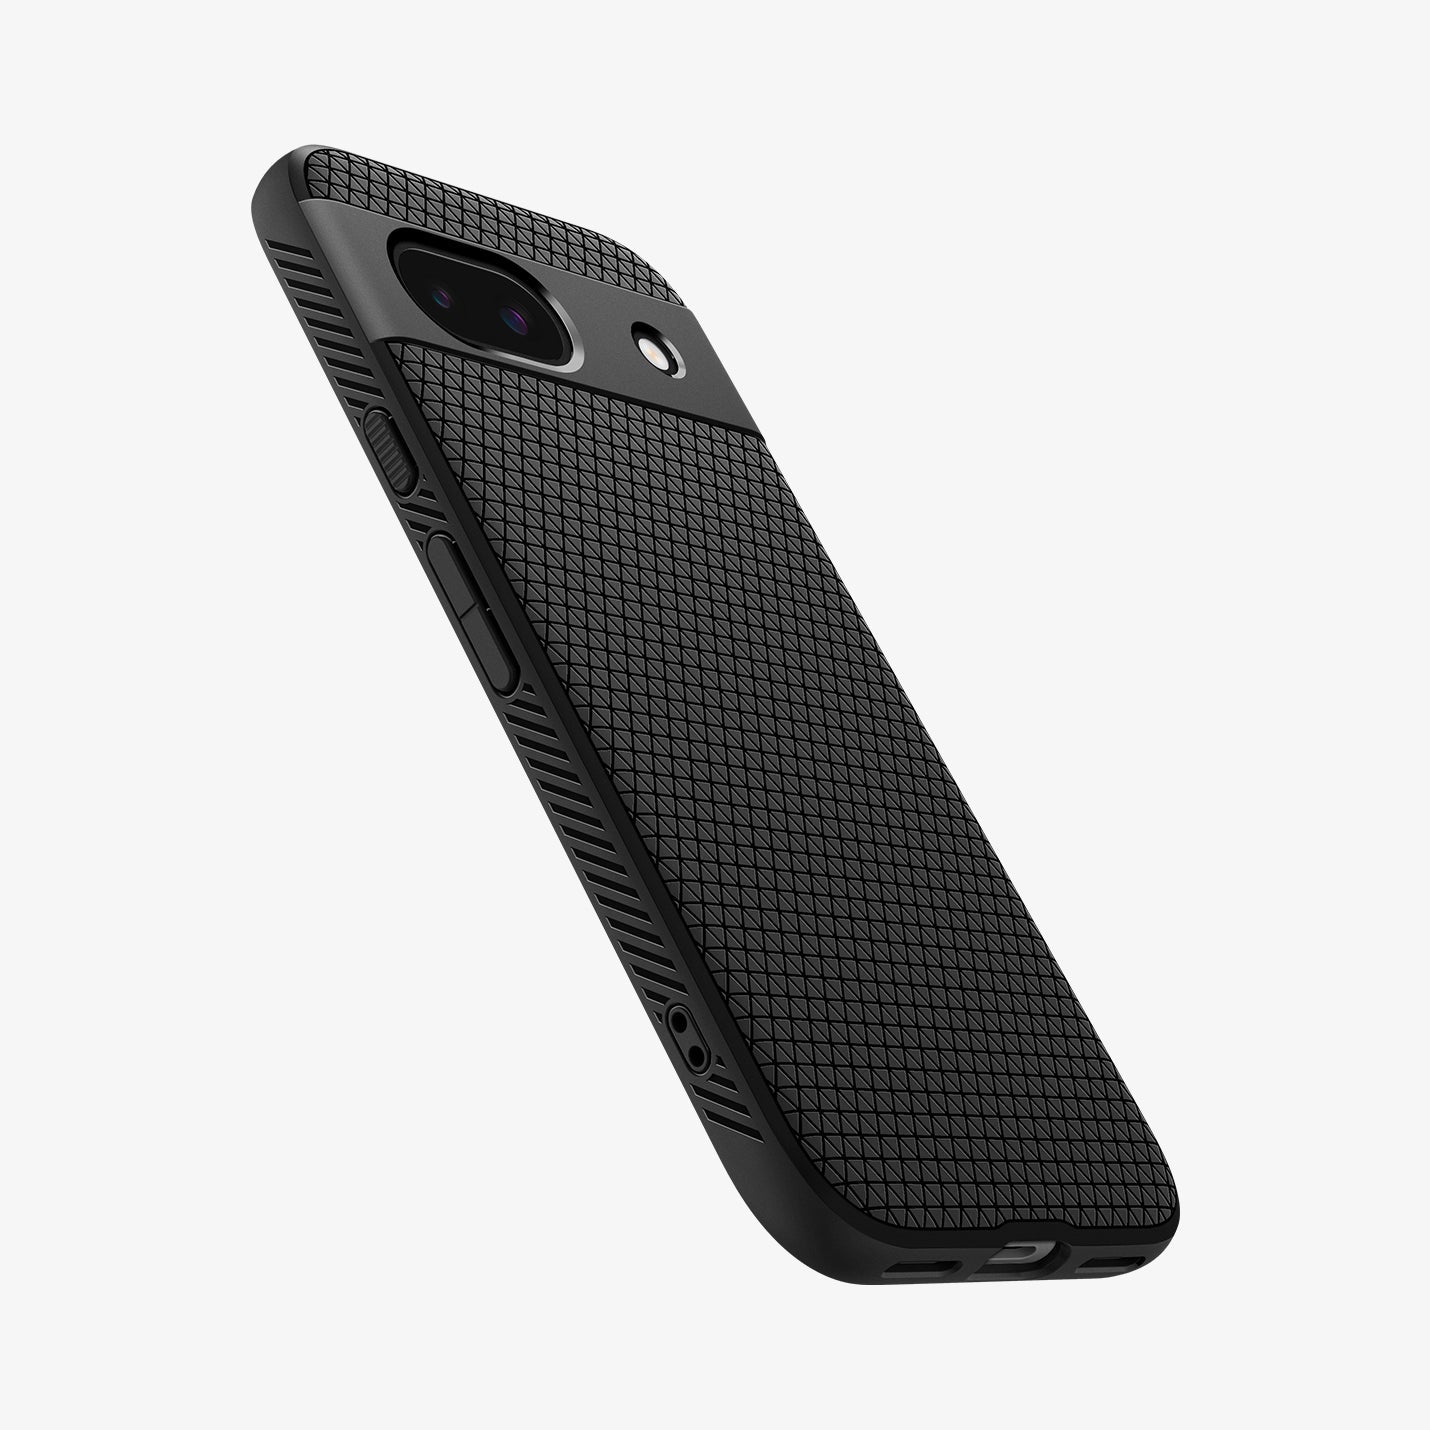 ACS07257 - Pixel 8a Case Liquid Air in Matte Black showing the back, partial side with side buttons and bottom